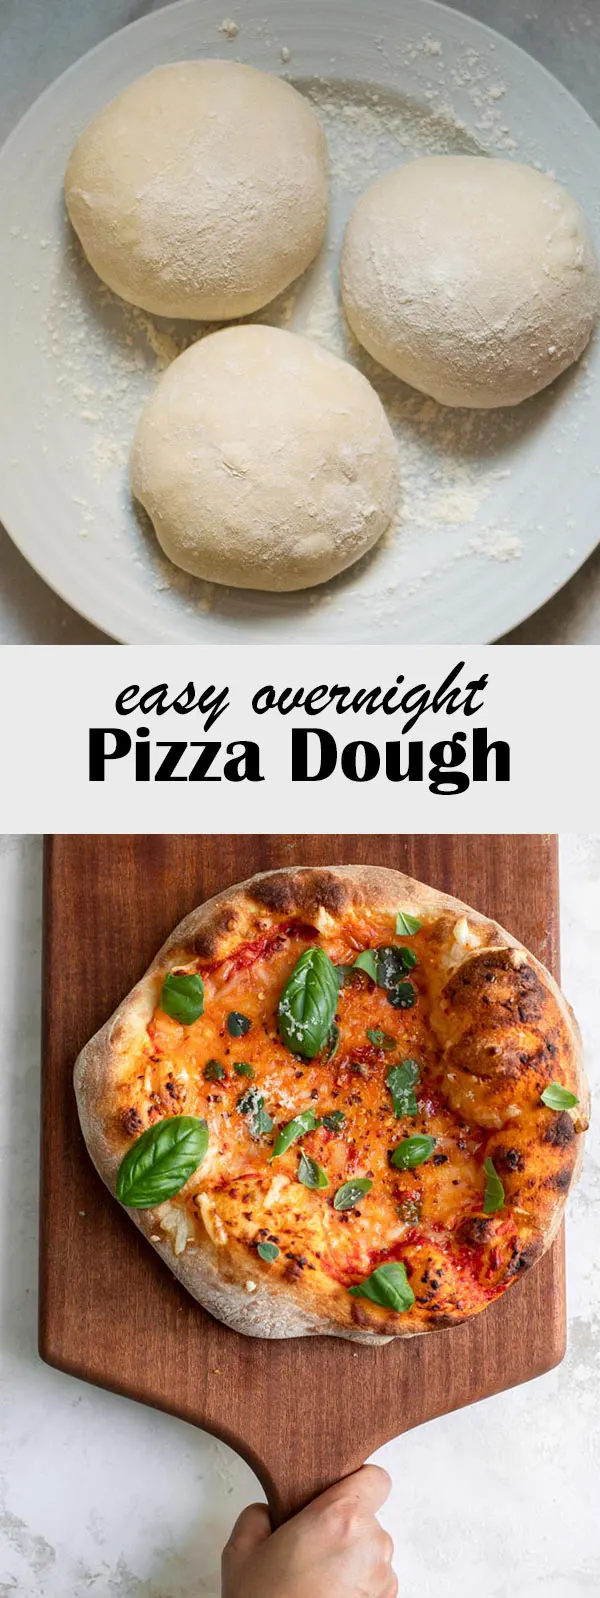 Easy Overnight Pizza Dough • The Curious Chickpea